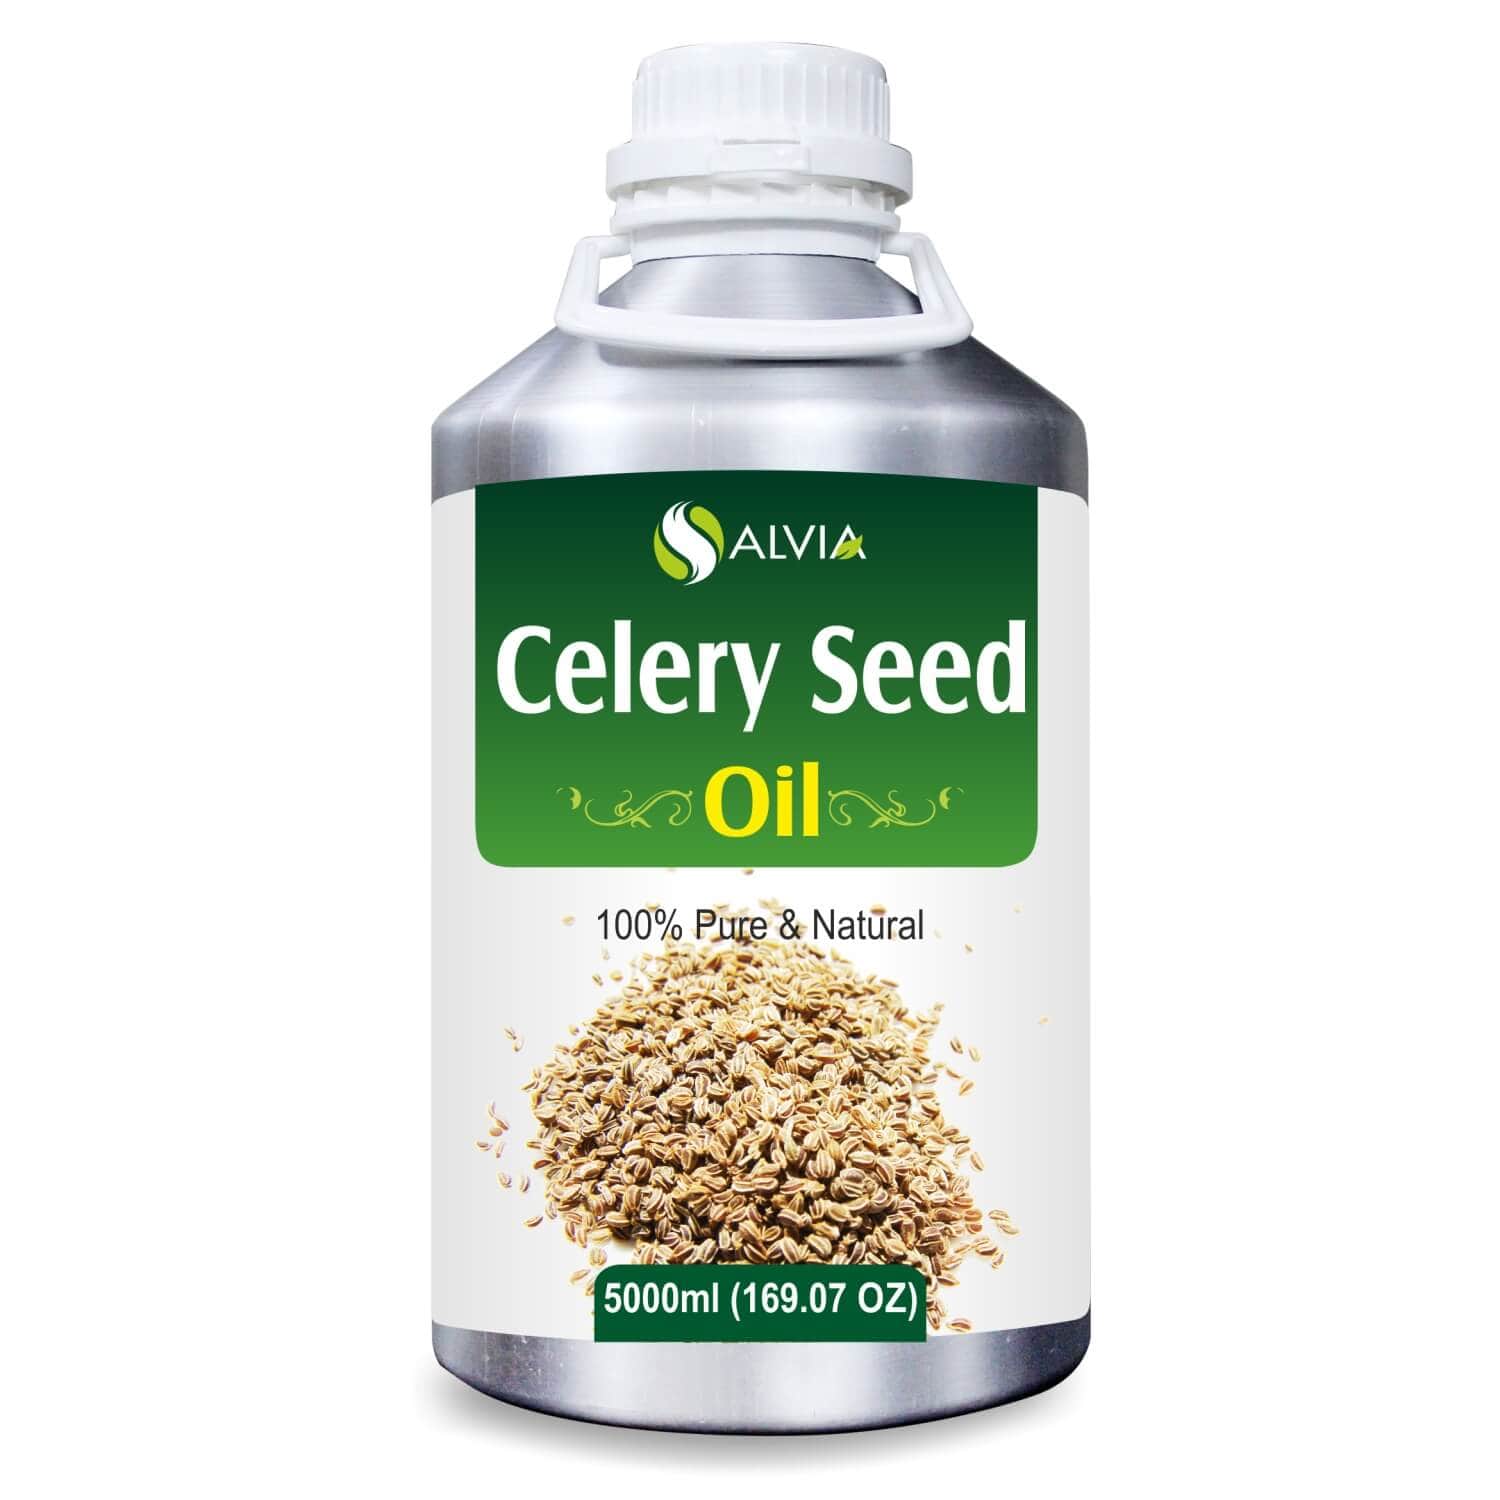 Salvia Natural Essential Oils 5000ml Celery Seed Oil (Apium Graveolens) 100% Natural Pure Essential Oil Fights Bacteria, Supports Bone Health, Therapeutic Grade Aromatic Oil